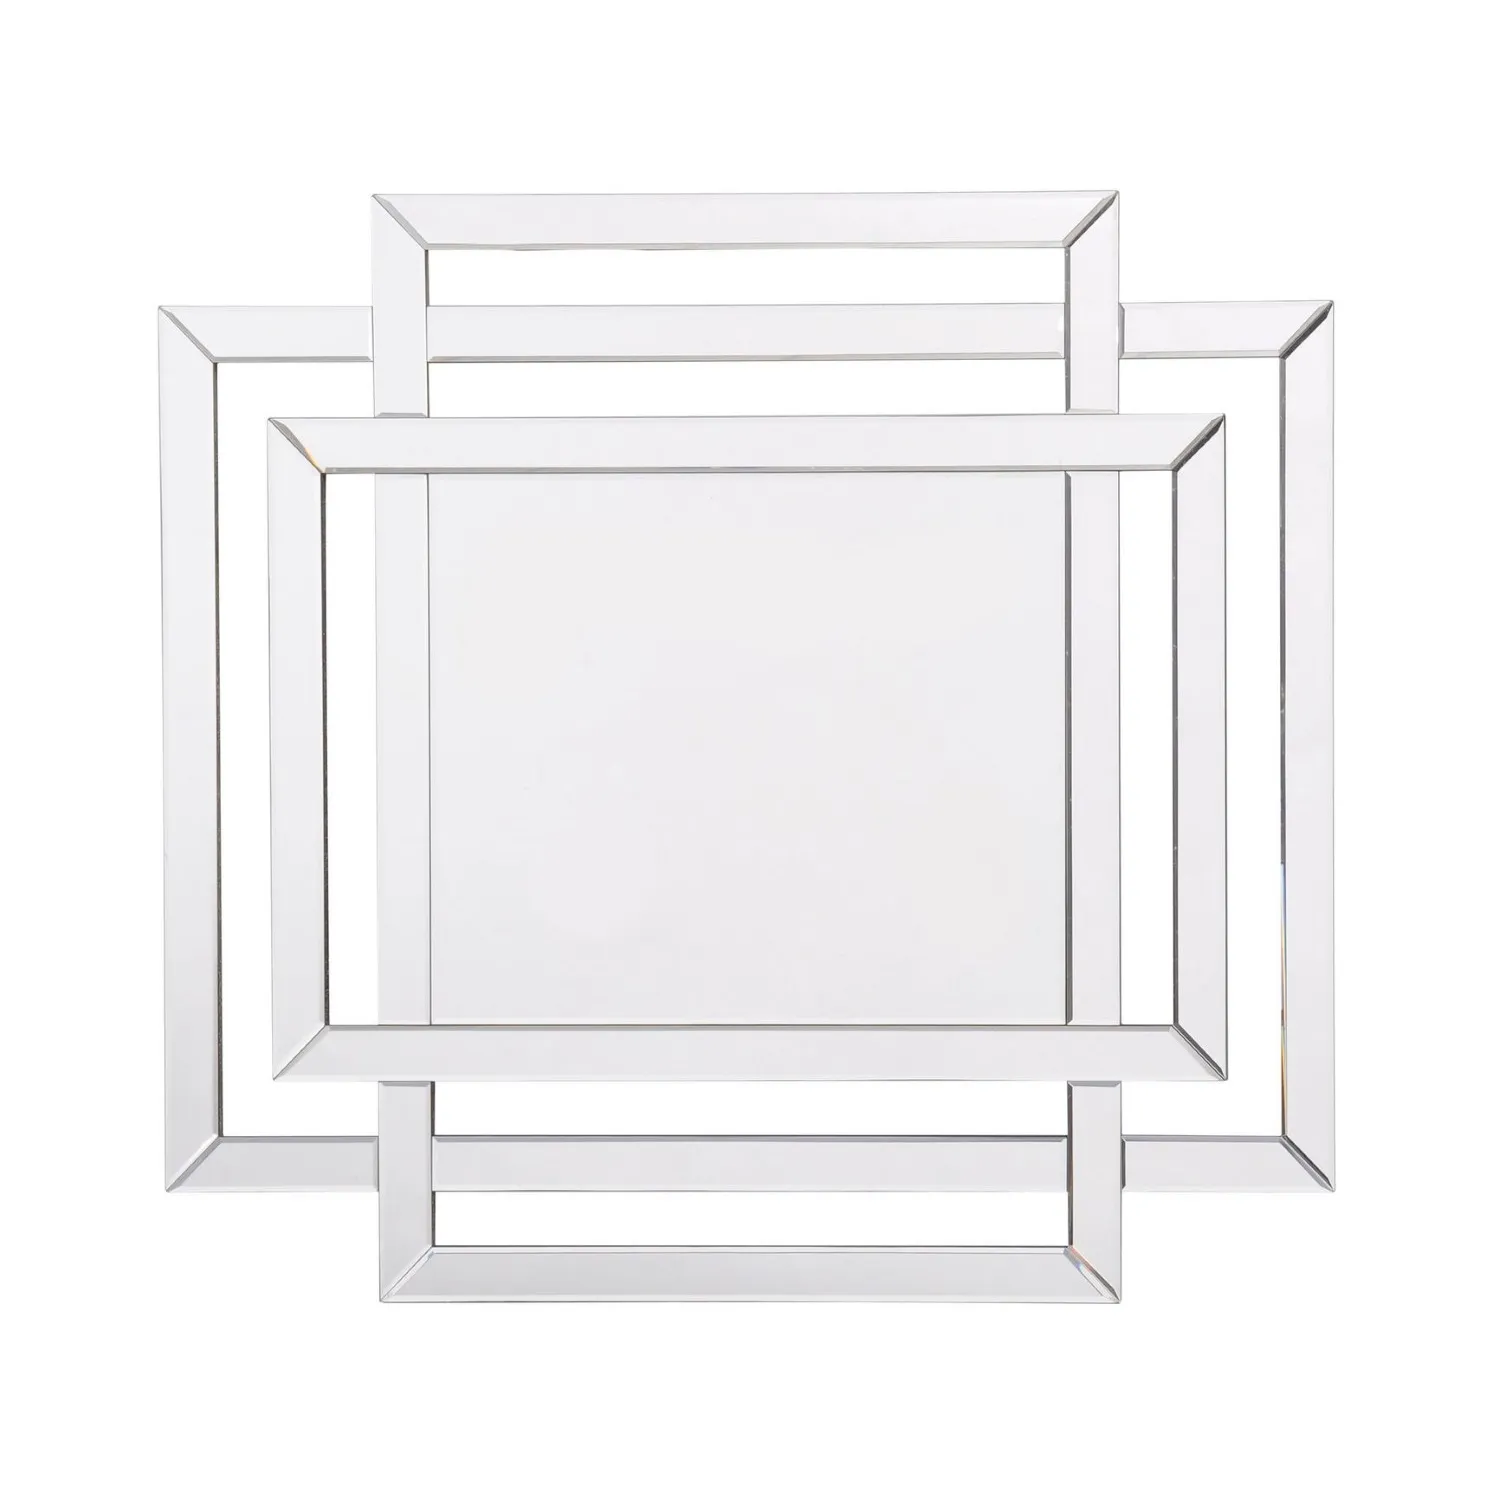 Abstract Rectangle Geometric Glass Framed Wall Mirror